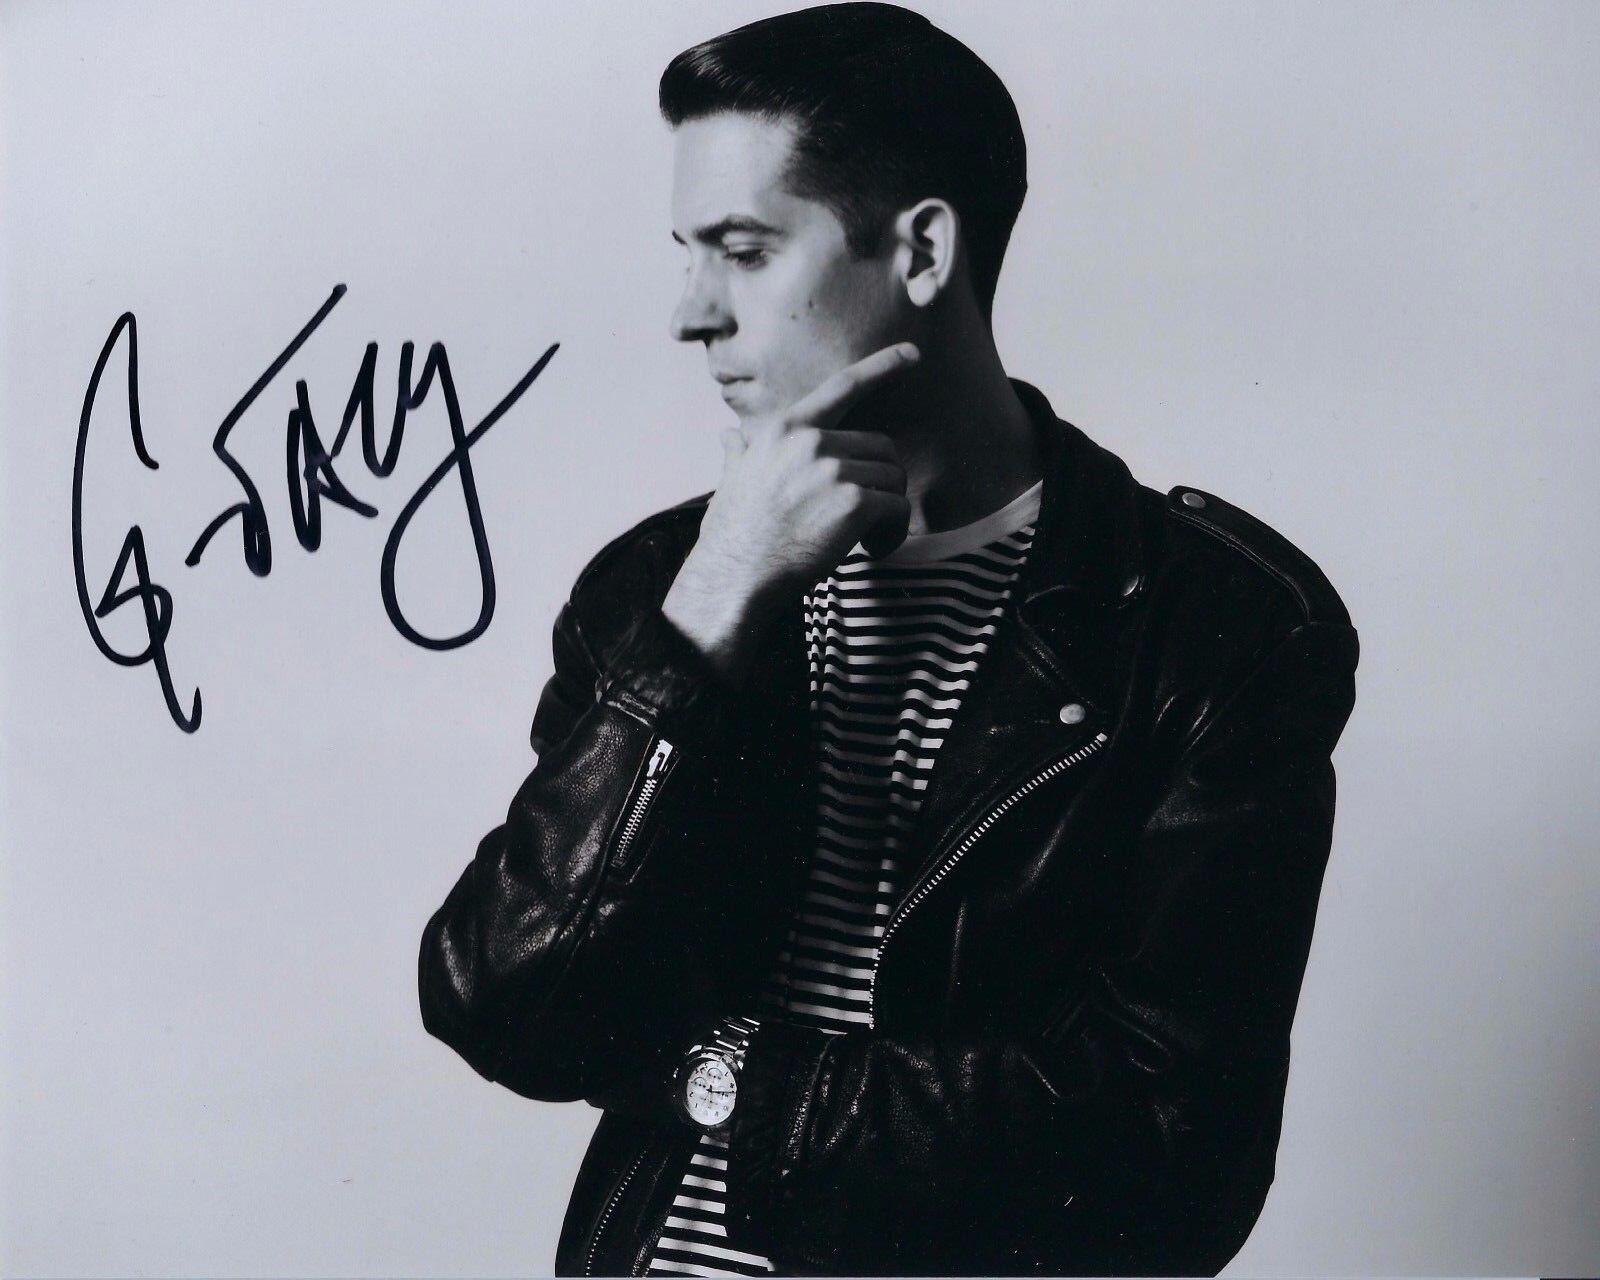 GFA Me, Myself & I Rapper * G-EAZY * Signed Autographed 8x10 Photo Poster painting PROOF COA